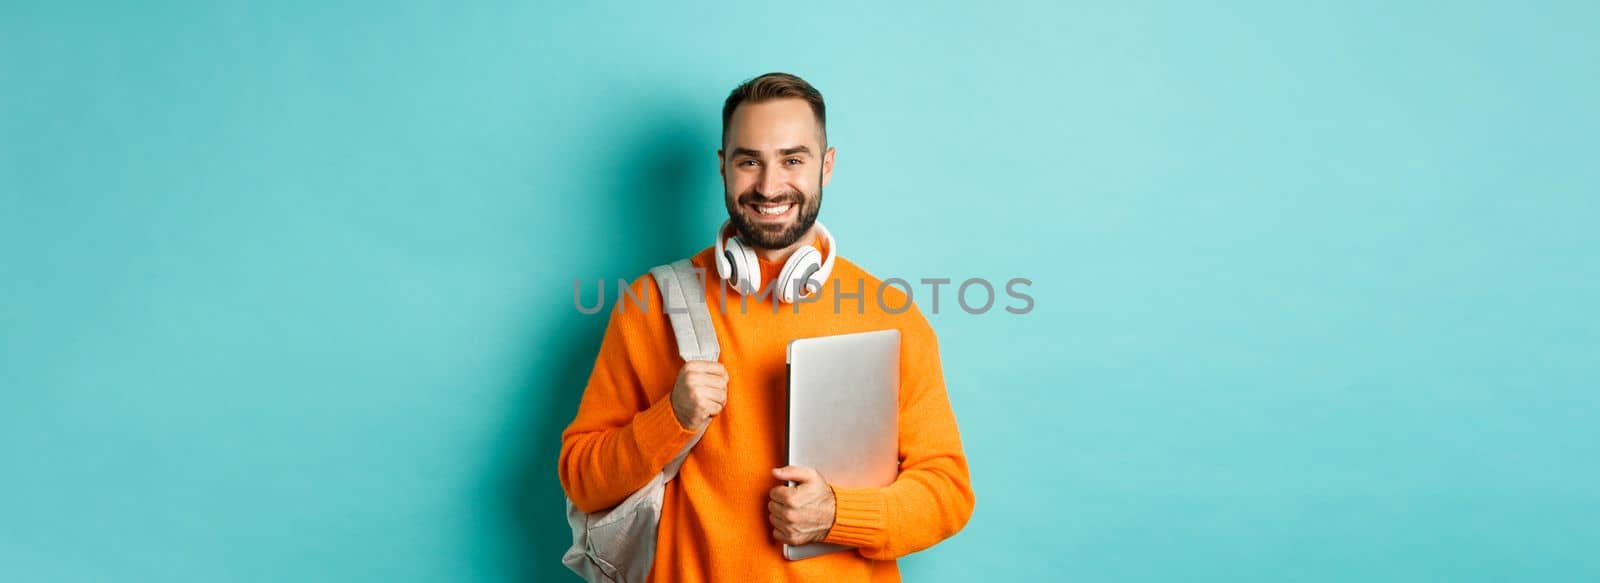 Happy man with backpack and headphones, holding laptop and smiling, going to work, standing over turquoise background.